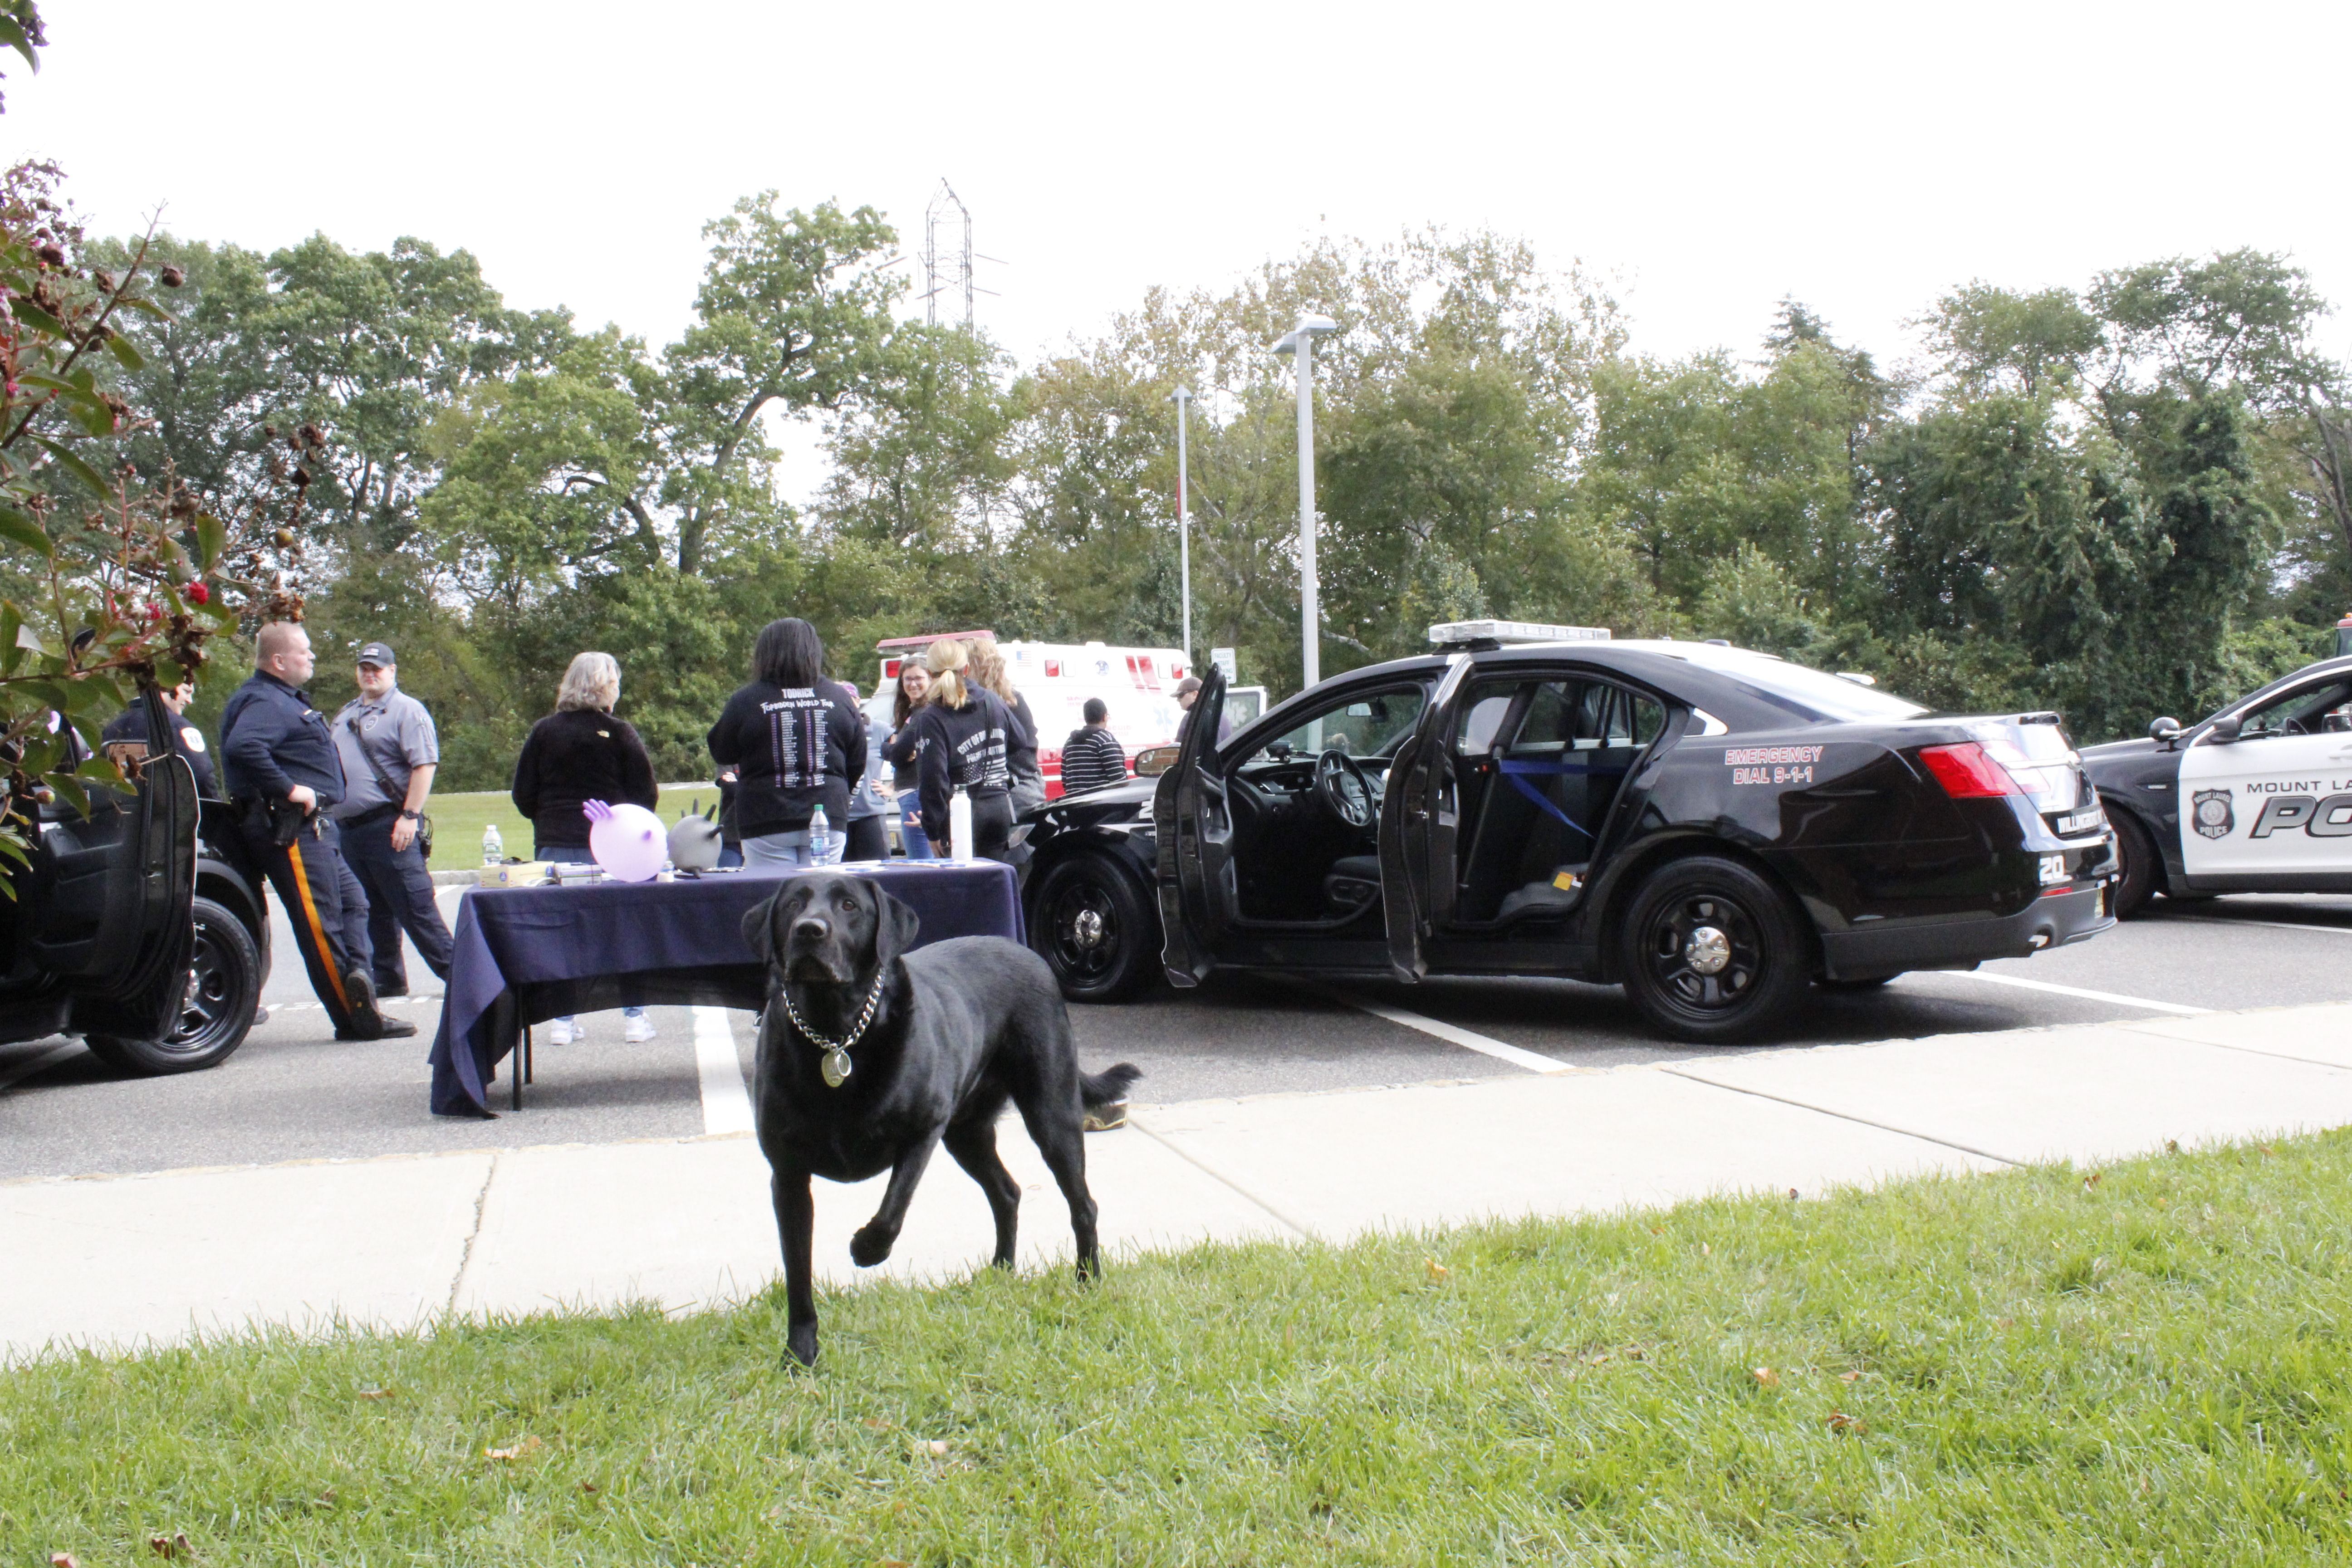 K9 and police cars